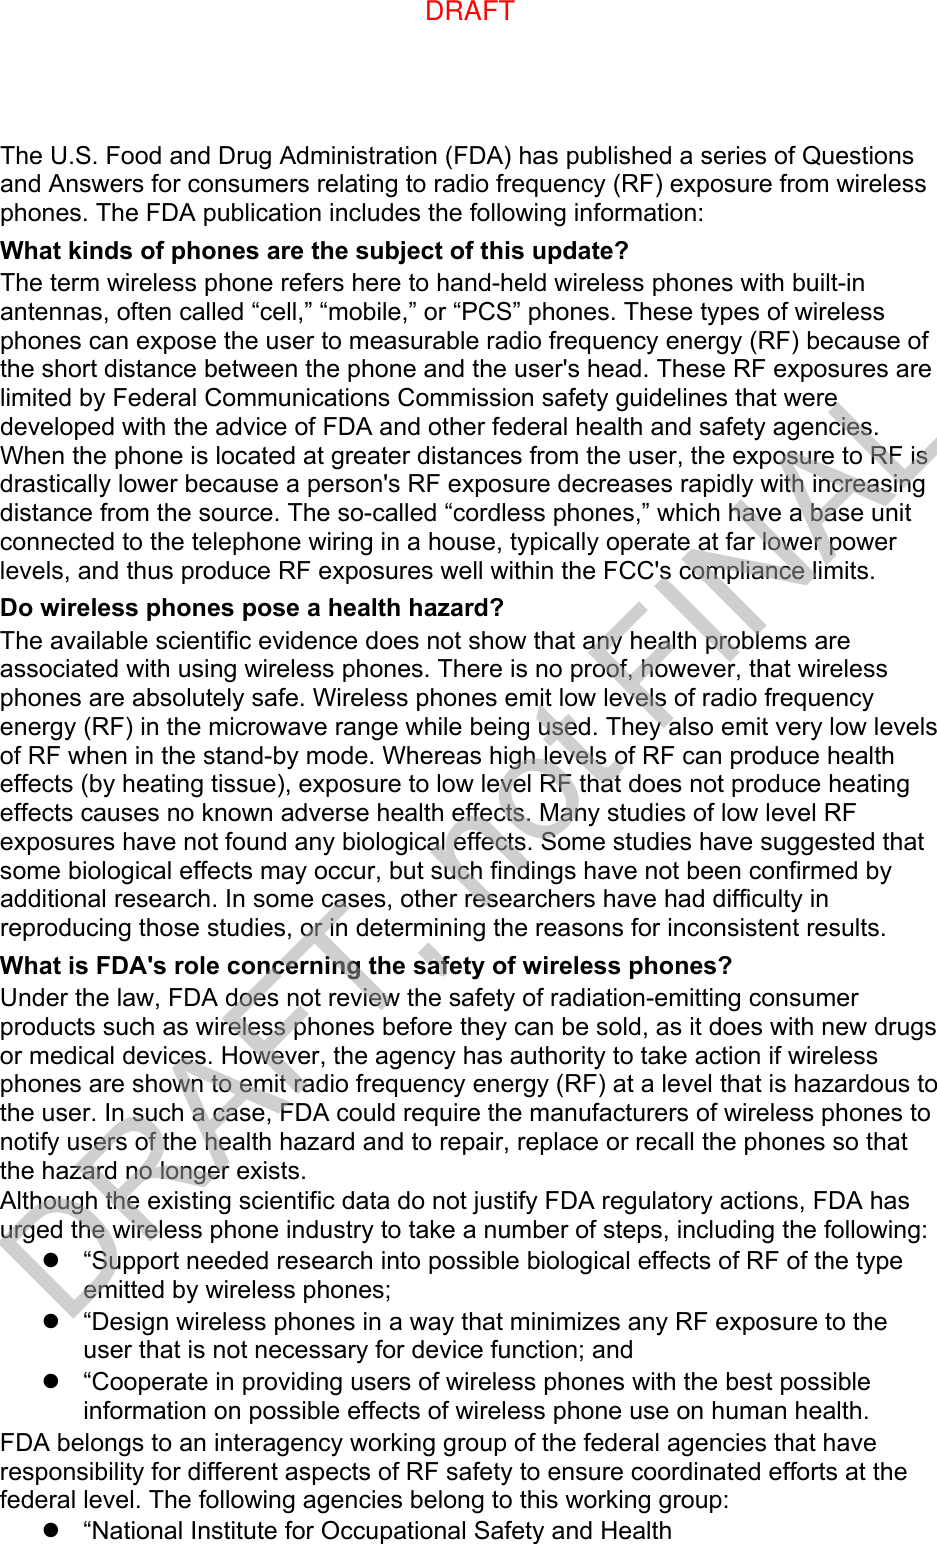 The U.S. Food and Drug Administration (FDA) has published a series of Questions and Answers for consumers relating to radio frequency (RF) exposure from wireless phones. The FDA publication includes the following information: What kinds of phones are the subject of this update? The term wireless phone refers here to hand-held wireless phones with built-in antennas, often called “cell,” “mobile,” or “PCS” phones. These types of wireless phones can expose the user to measurable radio frequency energy (RF) because of the short distance between the phone and the user&apos;s head. These RF exposures are limited by Federal Communications Commission safety guidelines that were developed with the advice of FDA and other federal health and safety agencies. When the phone is located at greater distances from the user, the exposure to RF is drastically lower because a person&apos;s RF exposure decreases rapidly with increasing distance from the source. The so-called “cordless phones,” which have a base unit connected to the telephone wiring in a house, typically operate at far lower power levels, and thus produce RF exposures well within the FCC&apos;s compliance limits. Do wireless phones pose a health hazard? The available scientific evidence does not show that any health problems are associated with using wireless phones. There is no proof, however, that wireless phones are absolutely safe. Wireless phones emit low levels of radio frequency energy (RF) in the microwave range while being used. They also emit very low levels of RF when in the stand-by mode. Whereas high levels of RF can produce health effects (by heating tissue), exposure to low level RF that does not produce heating effects causes no known adverse health effects. Many studies of low level RF exposures have not found any biological effects. Some studies have suggested that some biological effects may occur, but such findings have not been confirmed by additional research. In some cases, other researchers have had difficulty in reproducing those studies, or in determining the reasons for inconsistent results. What is FDA&apos;s role concerning the safety of wireless phones? Under the law, FDA does not review the safety of radiation-emitting consumer products such as wireless phones before they can be sold, as it does with new drugs or medical devices. However, the agency has authority to take action if wireless phones are shown to emit radio frequency energy (RF) at a level that is hazardous to the user. In such a case, FDA could require the manufacturers of wireless phones to notify users of the health hazard and to repair, replace or recall the phones so that the hazard no longer exists. Although the existing scientific data do not justify FDA regulatory actions, FDA has urged the wireless phone industry to take a number of steps, including the following: “Support needed research into possible biological effects of RF of the typeemitted by wireless phones;“Design wireless phones in a way that minimizes any RF exposure to theuser that is not necessary for device function; and“Cooperate in providing users of wireless phones with the best possibleinformation on possible effects of wireless phone use on human health.FDA belongs to an interagency working group of the federal agencies that have responsibility for different aspects of RF safety to ensure coordinated efforts at the federal level. The following agencies belong to this working group: “National Institute for Occupational Safety and HealthDRAFT, not FINALDRAFT